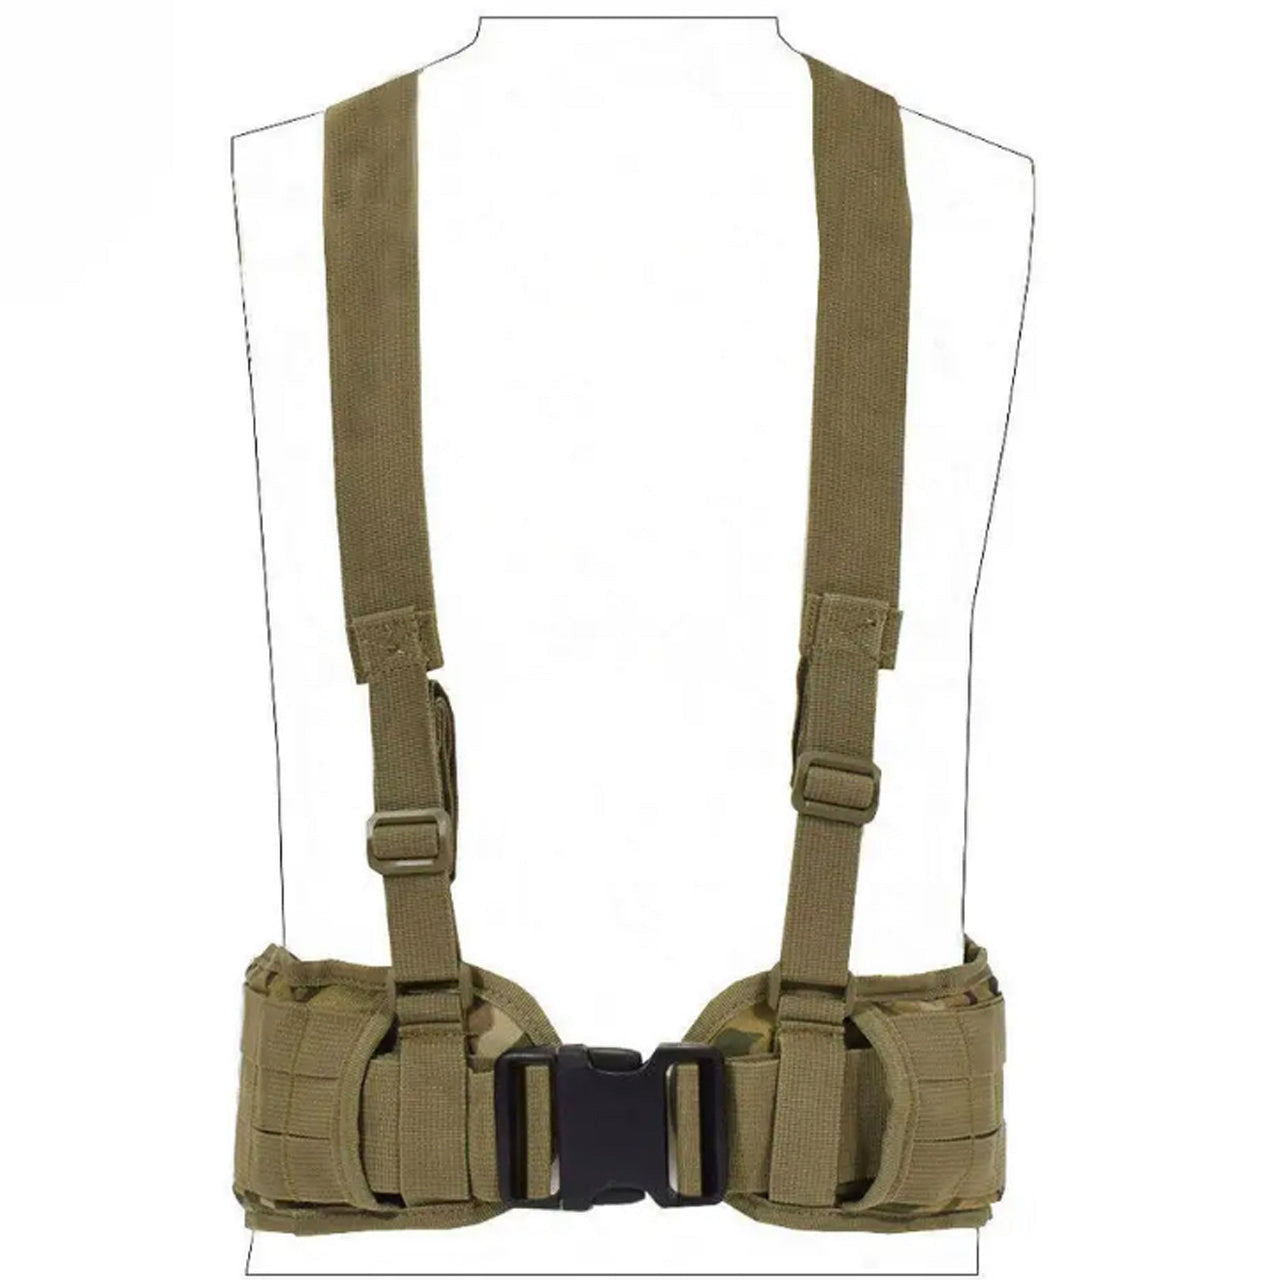 Boasting three rows of MOLLE-designed webbing straps for easy pouch attachment, the Cross Harness Platform is a lightweight, low-profile option with adjustable waist straps (34-64 inches) and easy-release, high-quality buckles. www.defenceqstore.com.au colour multicam front